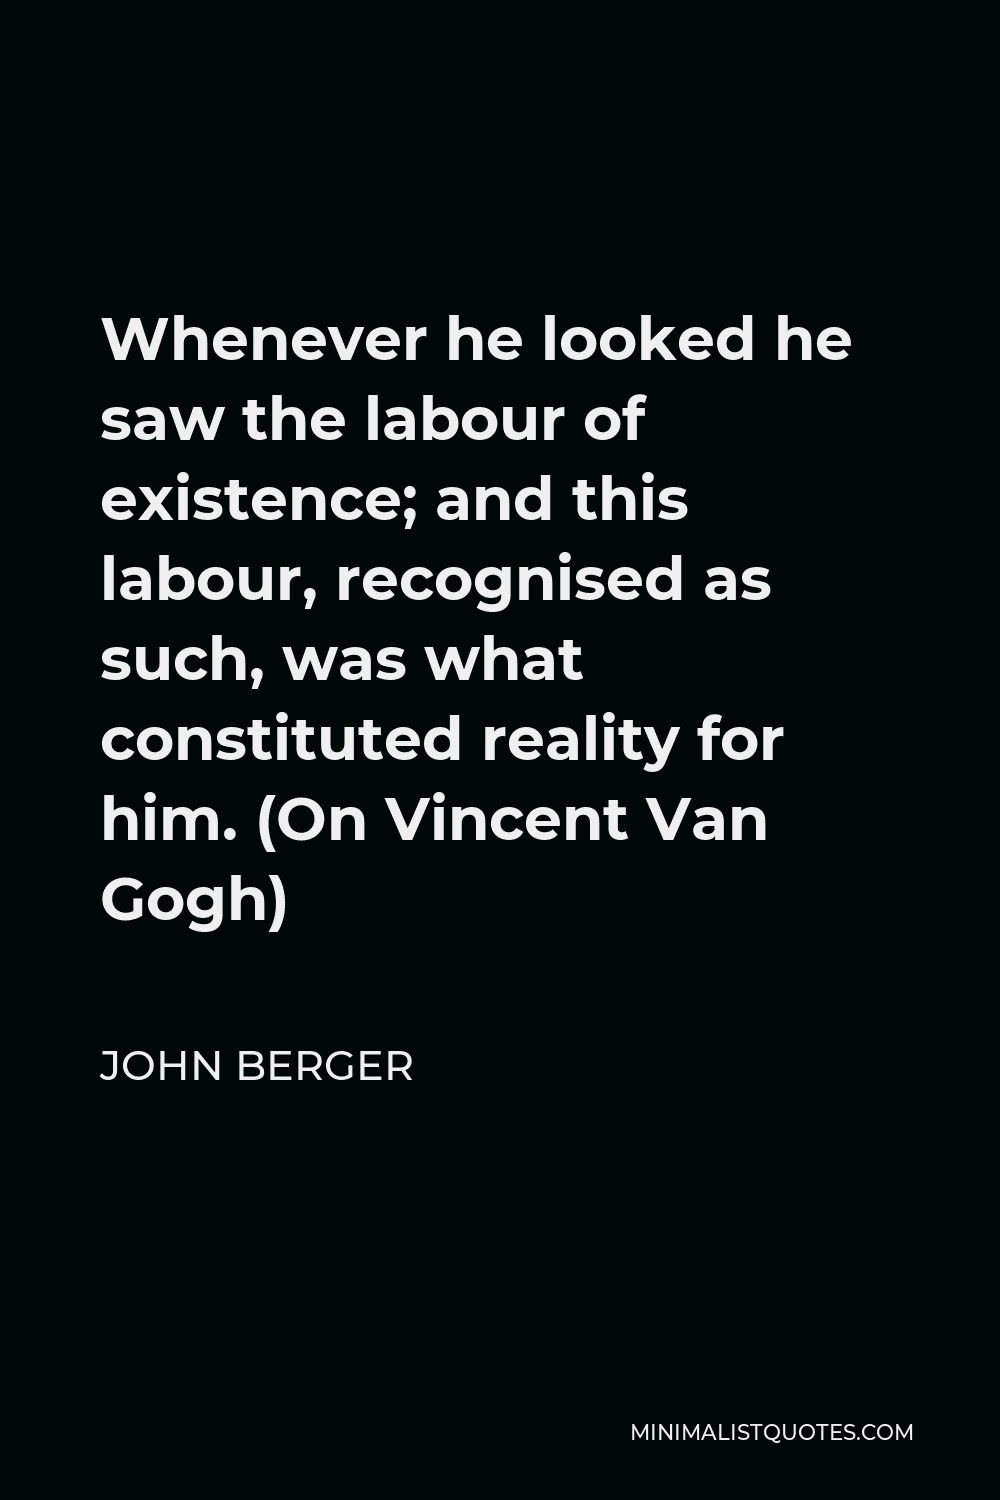 John Berger Quote - Whenever he looked he saw the labour of existence; and this labour, recognised as such, was what constituted reality for him. (On Vincent Van Gogh)